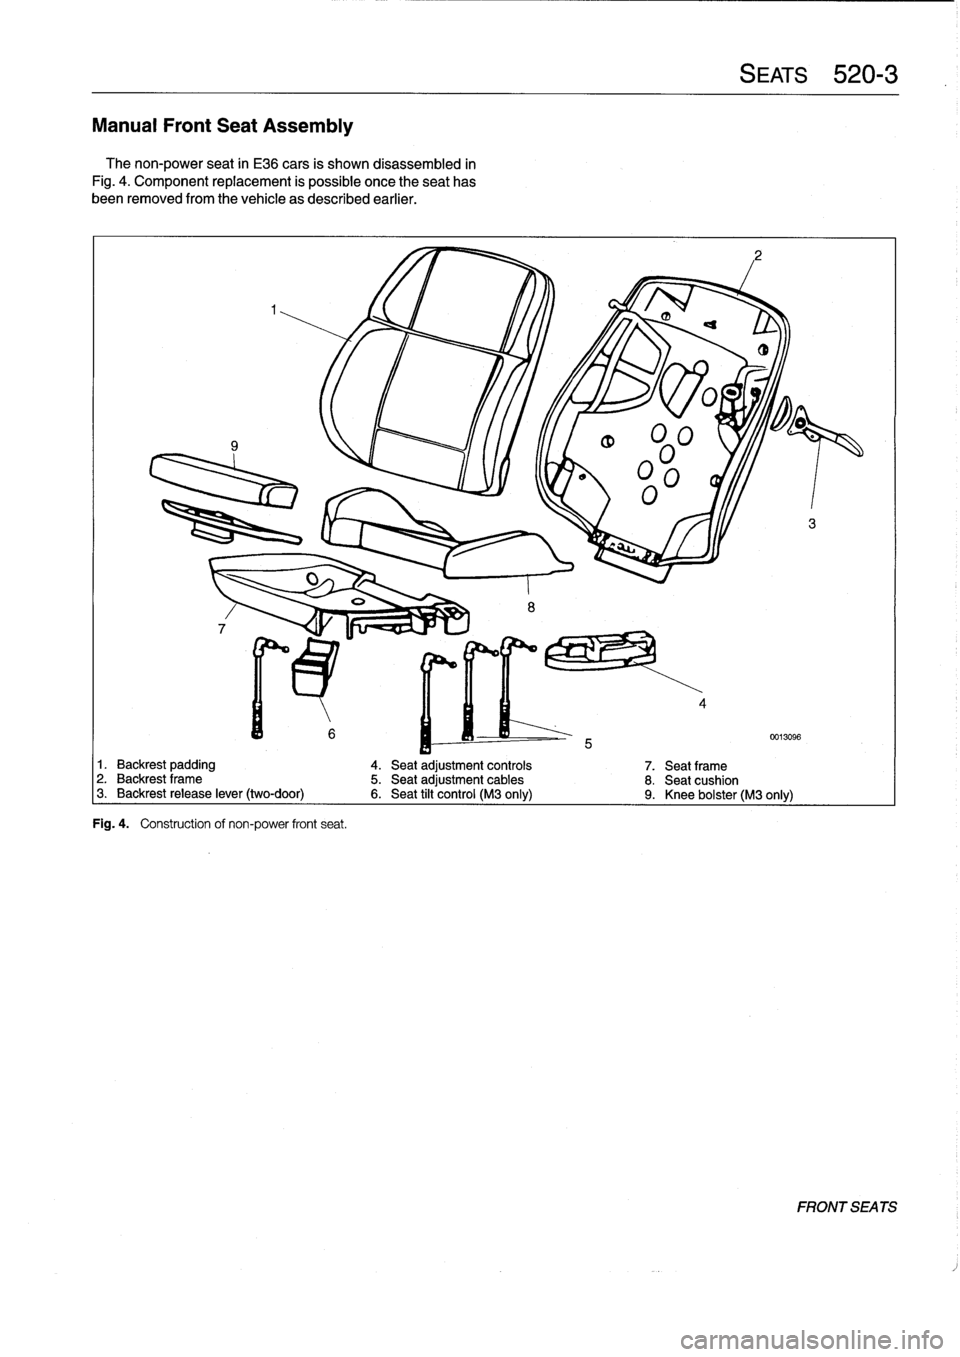 BMW 318i 1992 E36 Workshop Manual 
Manual
Front
Seat
Assembly

The
non-power
seat
in
E36
cars
is
shown
disassembled
in

Fig
.
4
.
Component
replacement
is
possible
once
theseat
has

been
removed
from
the
vehicle
as
described
earlier
.